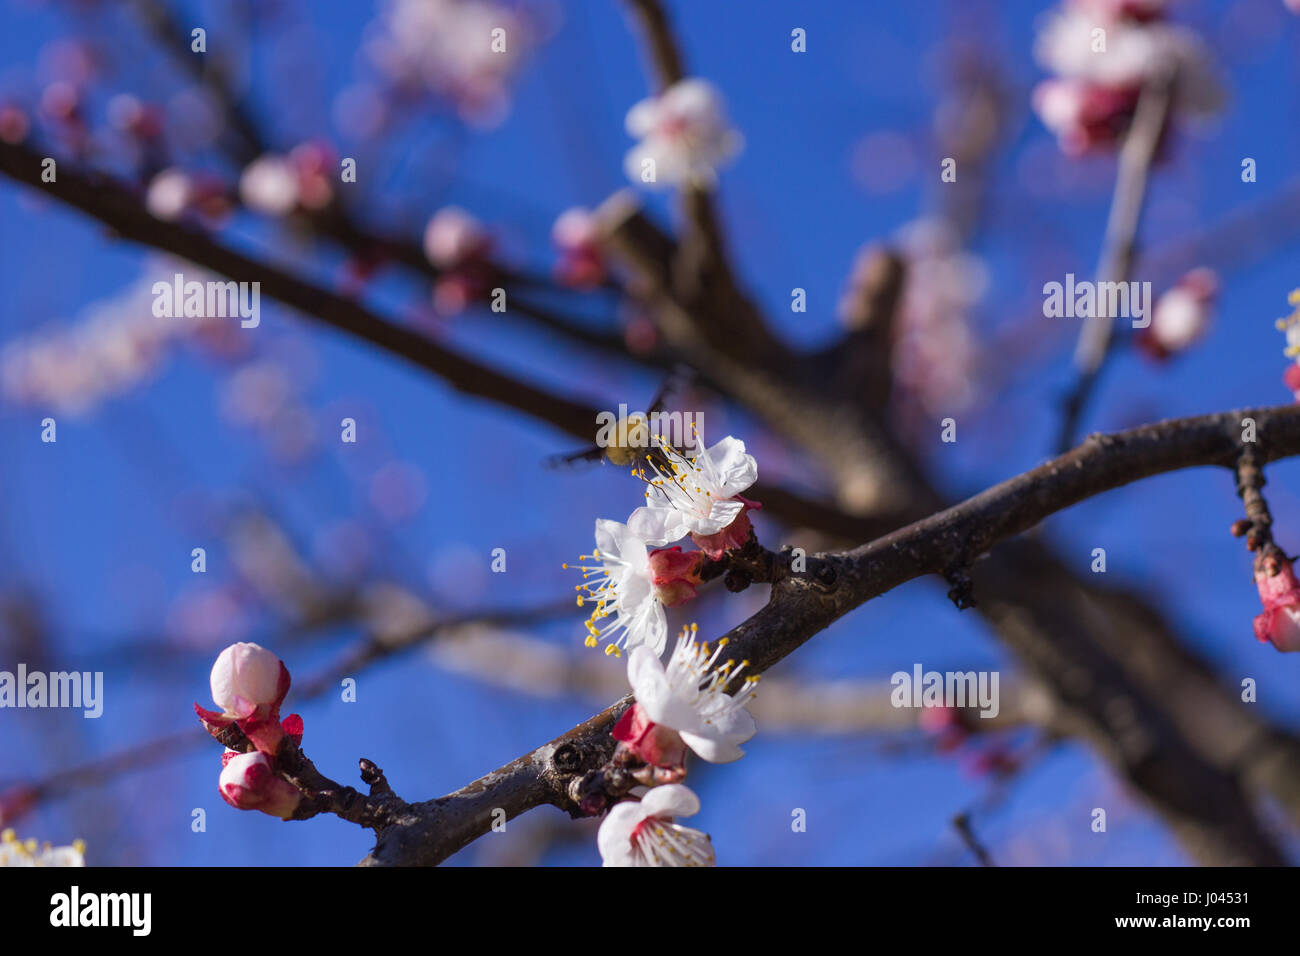 Hummingbird Insect on Apricot Flowers in the Sunset Stock Photo